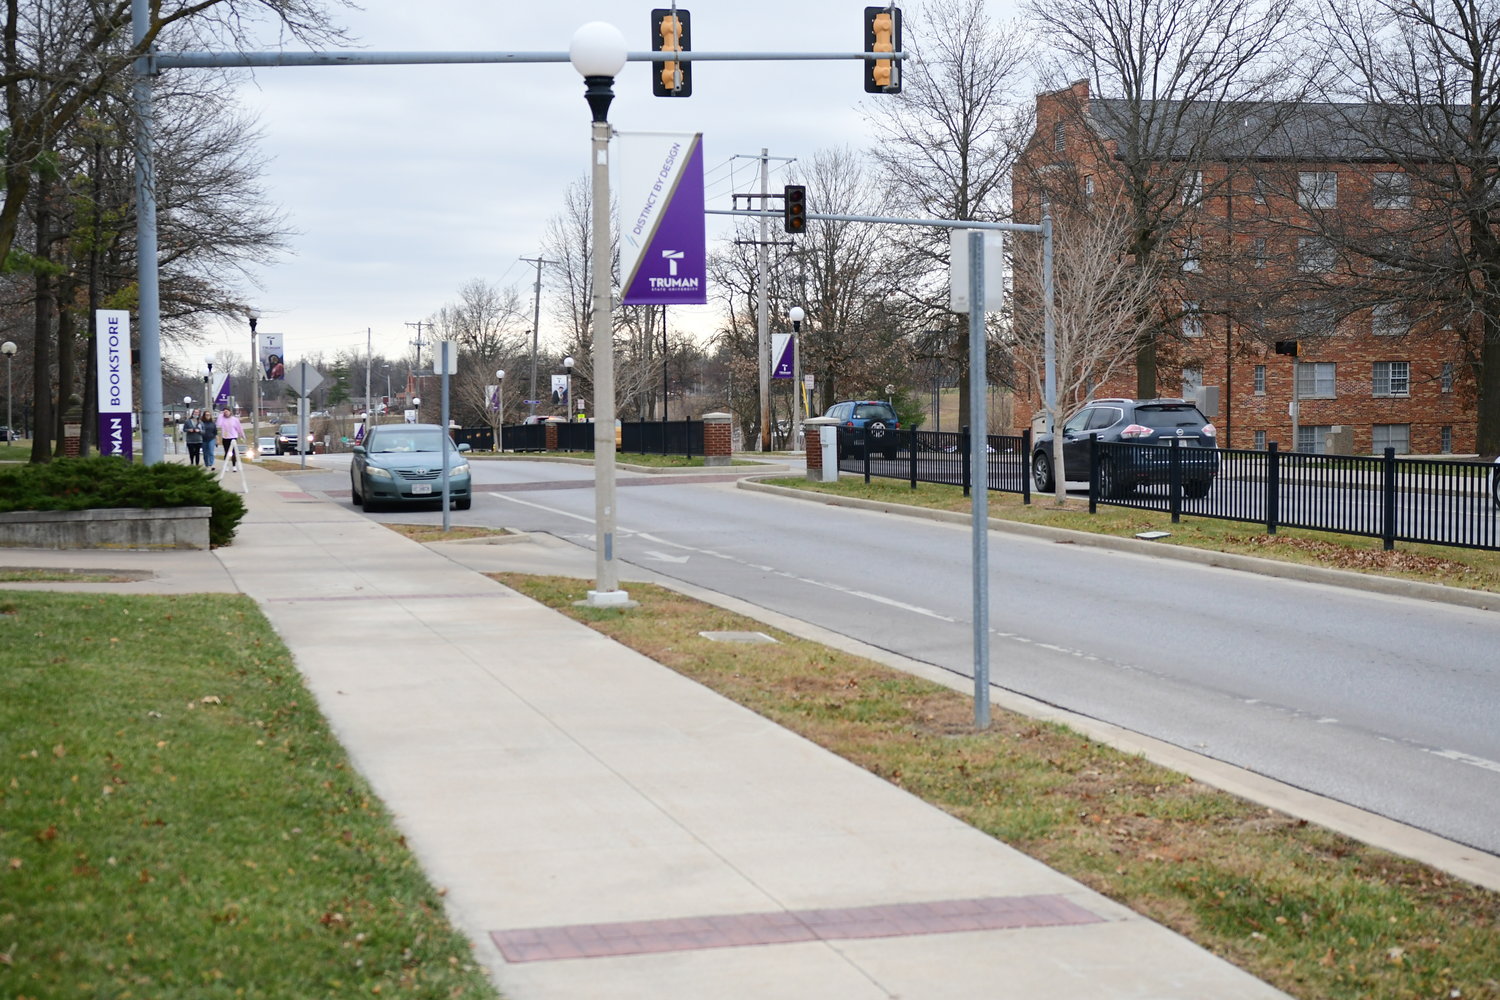 City and Truman officials have safety concerns about the crosswalk on South Franklin Street that is between the Student Union Building and Centennial Hall.